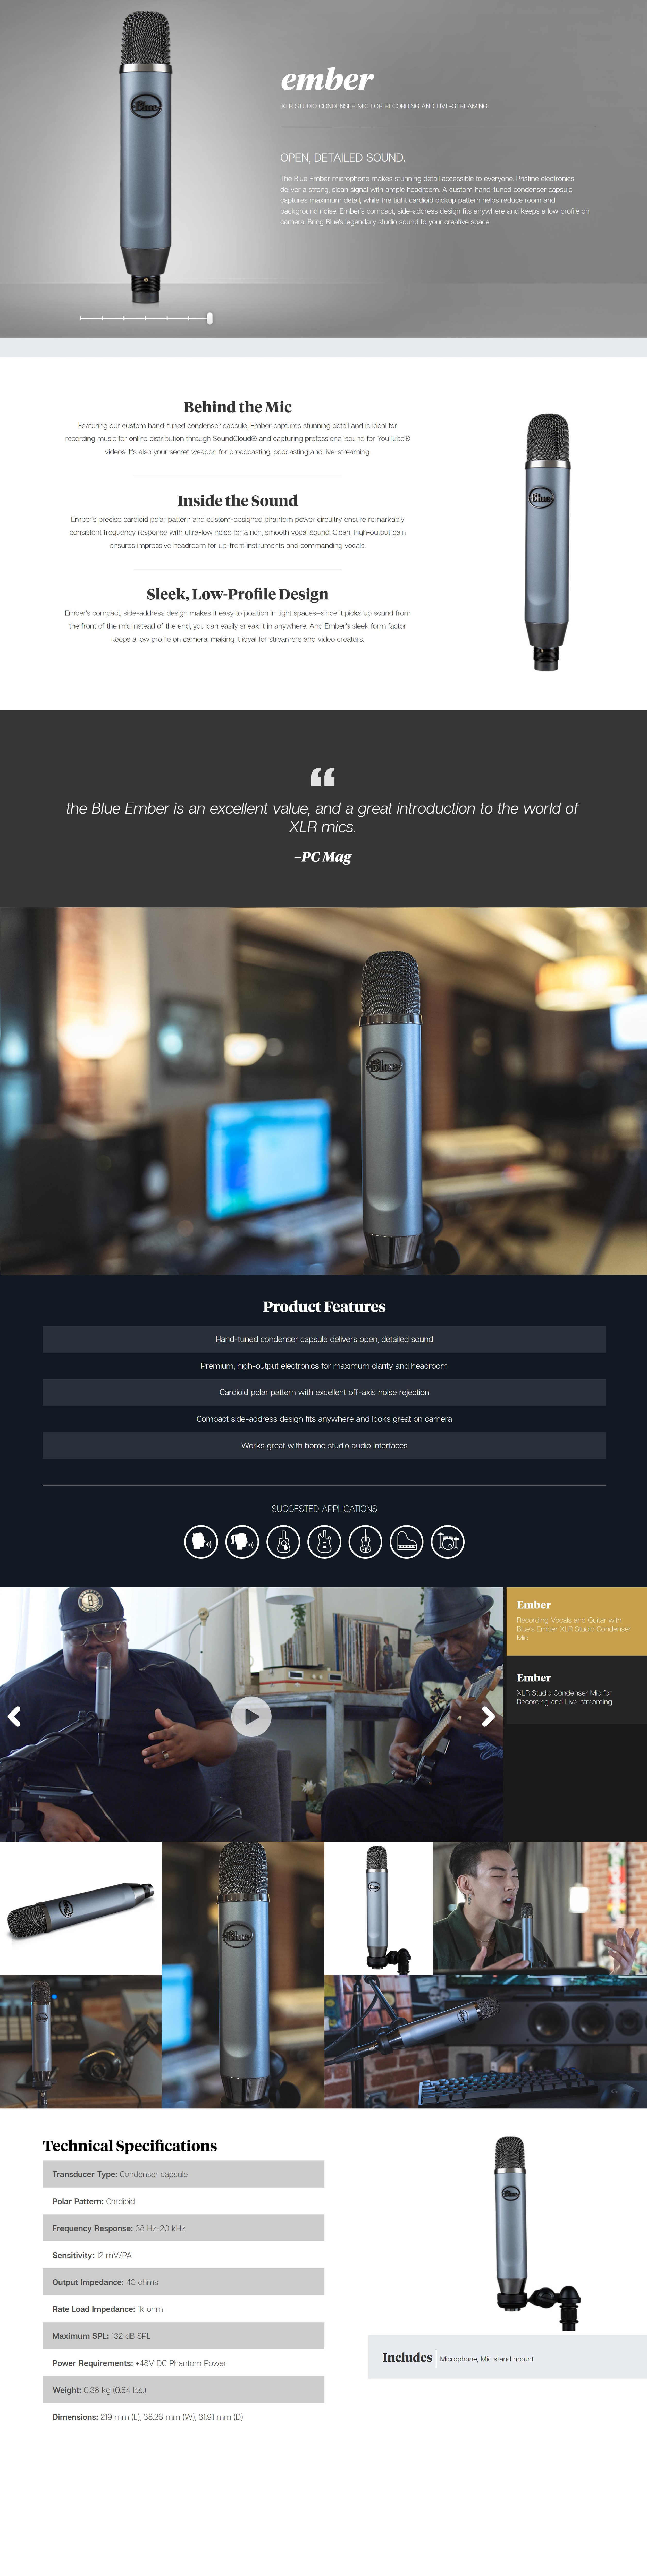 A large marketing image providing additional information about the product Blue Microphones Ember XLR Studio Condenser Microphone - Additional alt info not provided